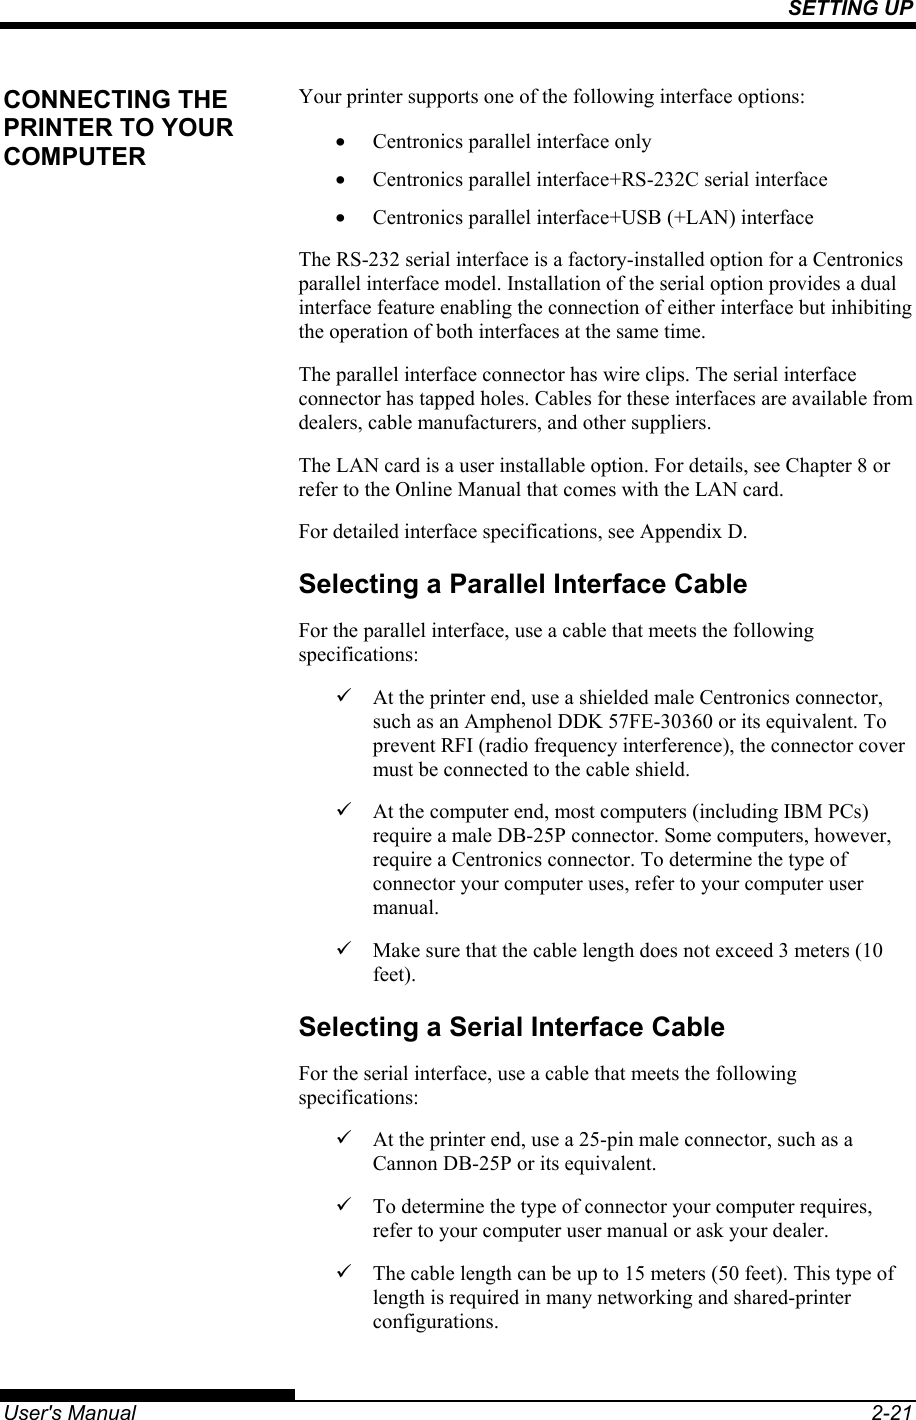 SETTING UP   User&apos;s Manual  2-21 Your printer supports one of the following interface options: •  Centronics parallel interface only •  Centronics parallel interface+RS-232C serial interface •  Centronics parallel interface+USB (+LAN) interface The RS-232 serial interface is a factory-installed option for a Centronics parallel interface model. Installation of the serial option provides a dual interface feature enabling the connection of either interface but inhibiting the operation of both interfaces at the same time. The parallel interface connector has wire clips. The serial interface connector has tapped holes. Cables for these interfaces are available from dealers, cable manufacturers, and other suppliers. The LAN card is a user installable option. For details, see Chapter 8 or refer to the Online Manual that comes with the LAN card. For detailed interface specifications, see Appendix D. Selecting a Parallel Interface Cable For the parallel interface, use a cable that meets the following specifications: 9  At the printer end, use a shielded male Centronics connector, such as an Amphenol DDK 57FE-30360 or its equivalent. To prevent RFI (radio frequency interference), the connector cover must be connected to the cable shield. 9  At the computer end, most computers (including IBM PCs) require a male DB-25P connector. Some computers, however, require a Centronics connector. To determine the type of connector your computer uses, refer to your computer user manual. 9  Make sure that the cable length does not exceed 3 meters (10 feet). Selecting a Serial Interface Cable For the serial interface, use a cable that meets the following specifications: 9  At the printer end, use a 25-pin male connector, such as a Cannon DB-25P or its equivalent. 9  To determine the type of connector your computer requires, refer to your computer user manual or ask your dealer. 9  The cable length can be up to 15 meters (50 feet). This type of length is required in many networking and shared-printer configurations. CONNECTING THE PRINTER TO YOUR COMPUTER 